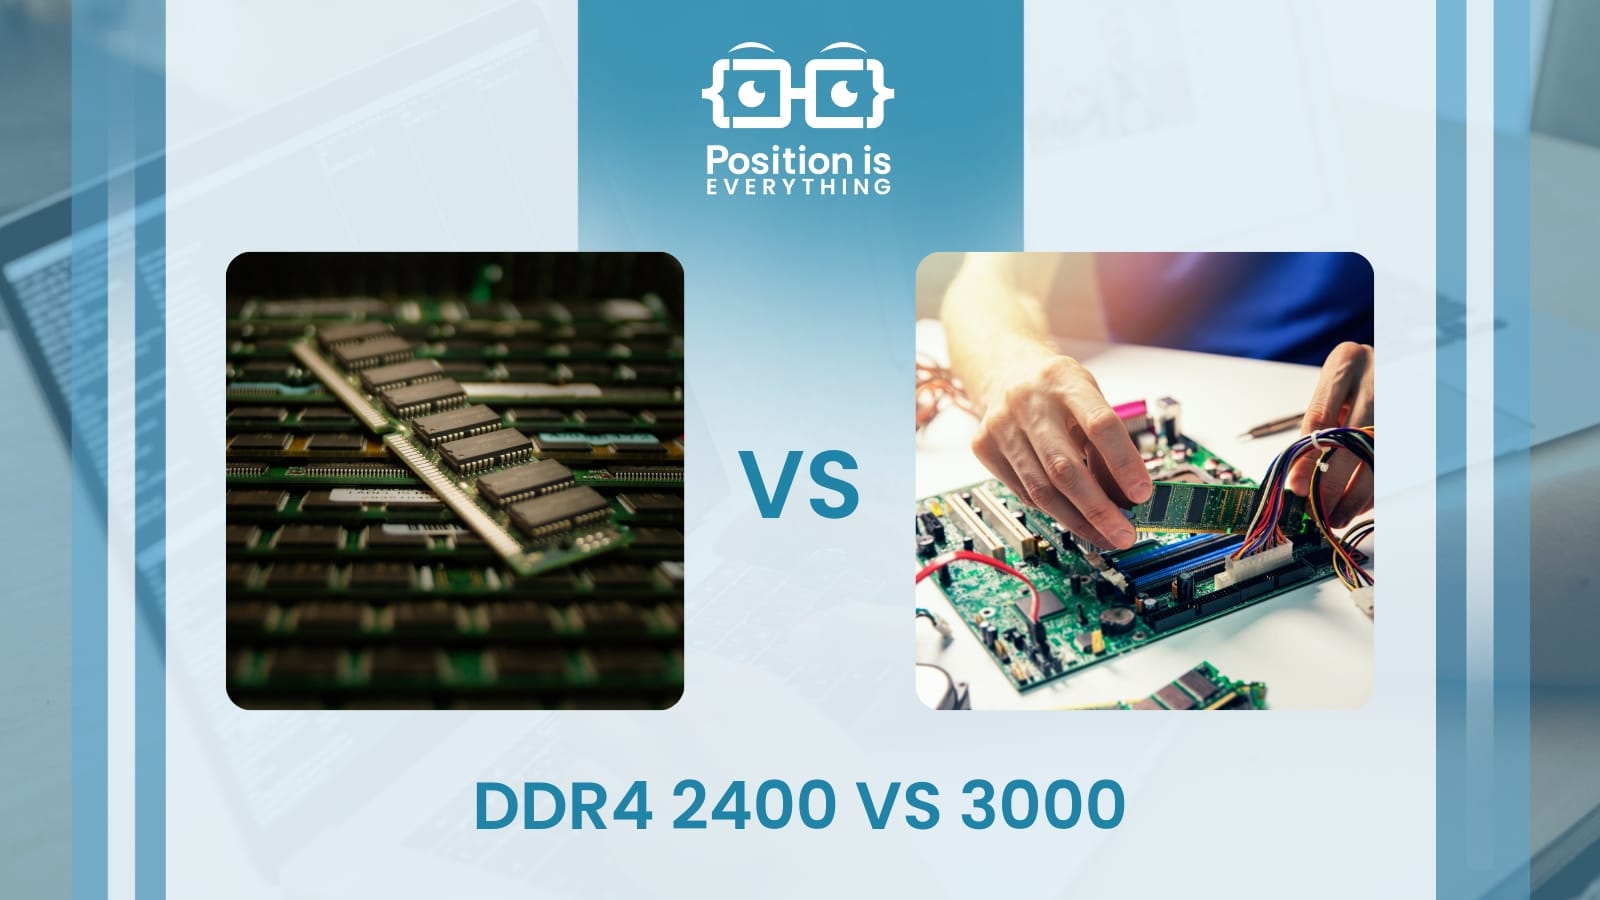 Piping Sightseeing dobbelt DDR4 2400 vs 3000: Is the Difference Between Them Noticeable?